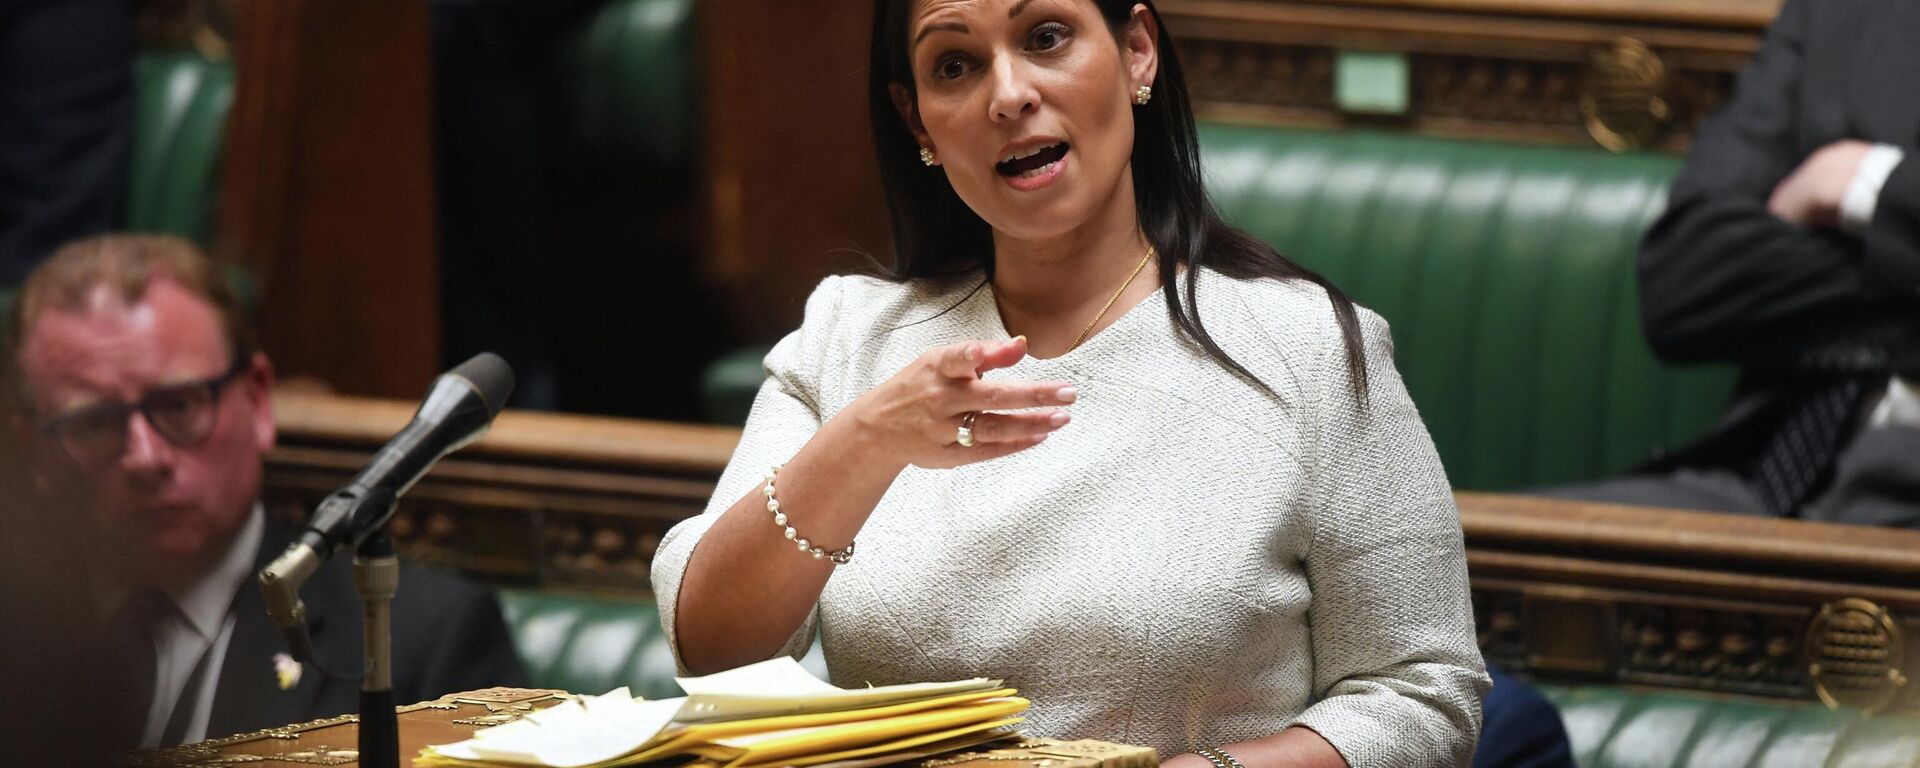 A handout photograph released by the UK Parliament shows Britain's Home Secretary Priti Patel gesturing as she gives a statement concerning the deal plan to send migrants and asylum seekers who cross the Channel to Rwanda, at the House of Commons, in London, on April 19, 2022 - Sputnik International, 1920, 07.05.2022